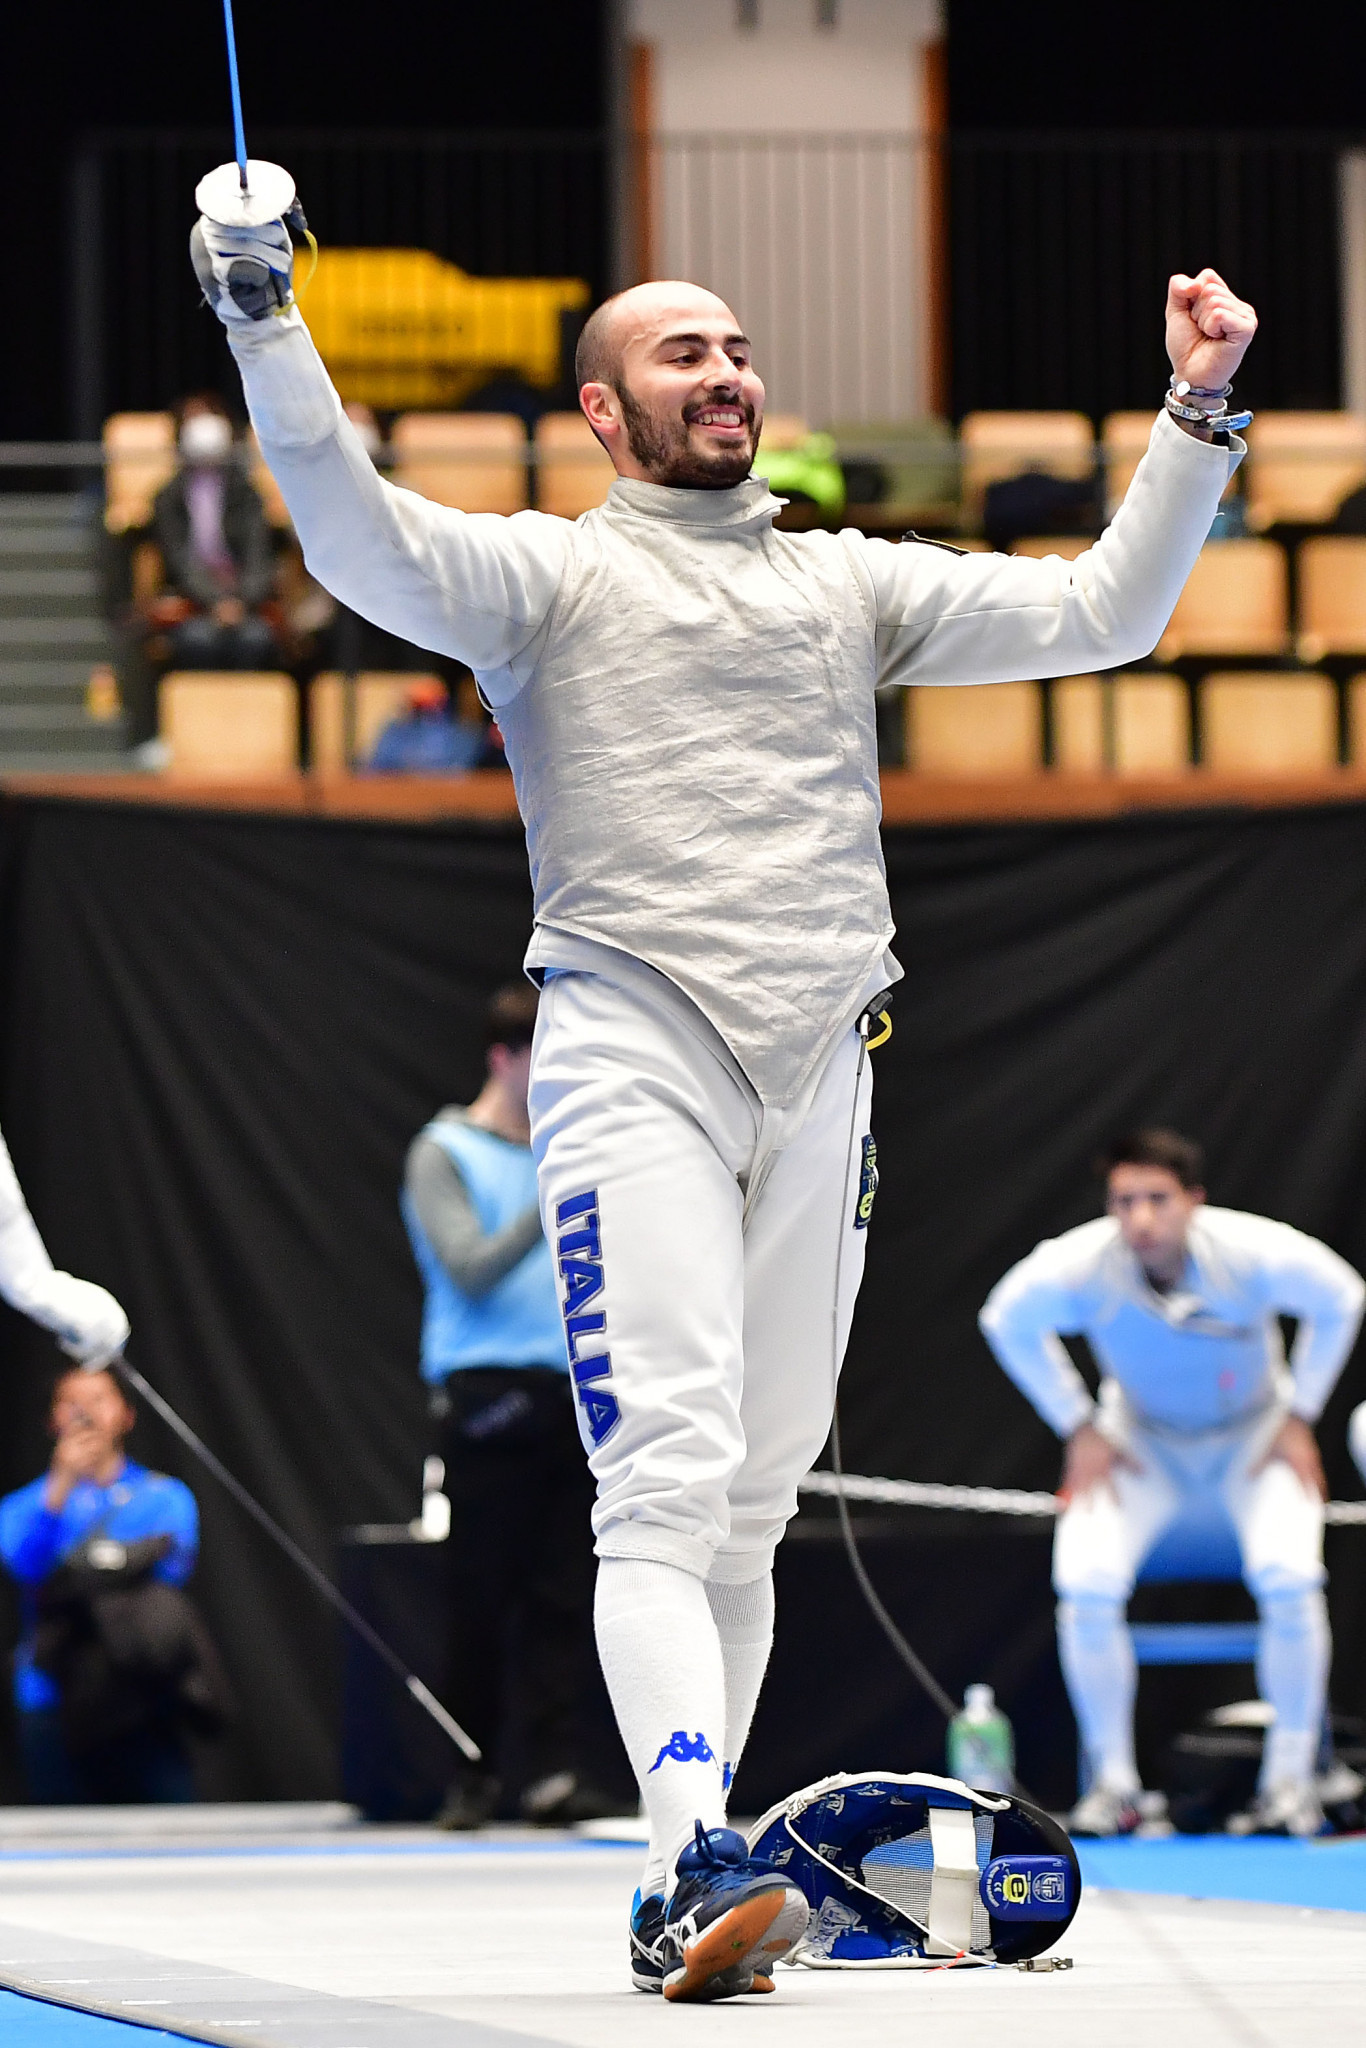 Italy's world number one Alessio Foconi will be among the competitors at the FIE Men's Foil World Cup ©Getty Images